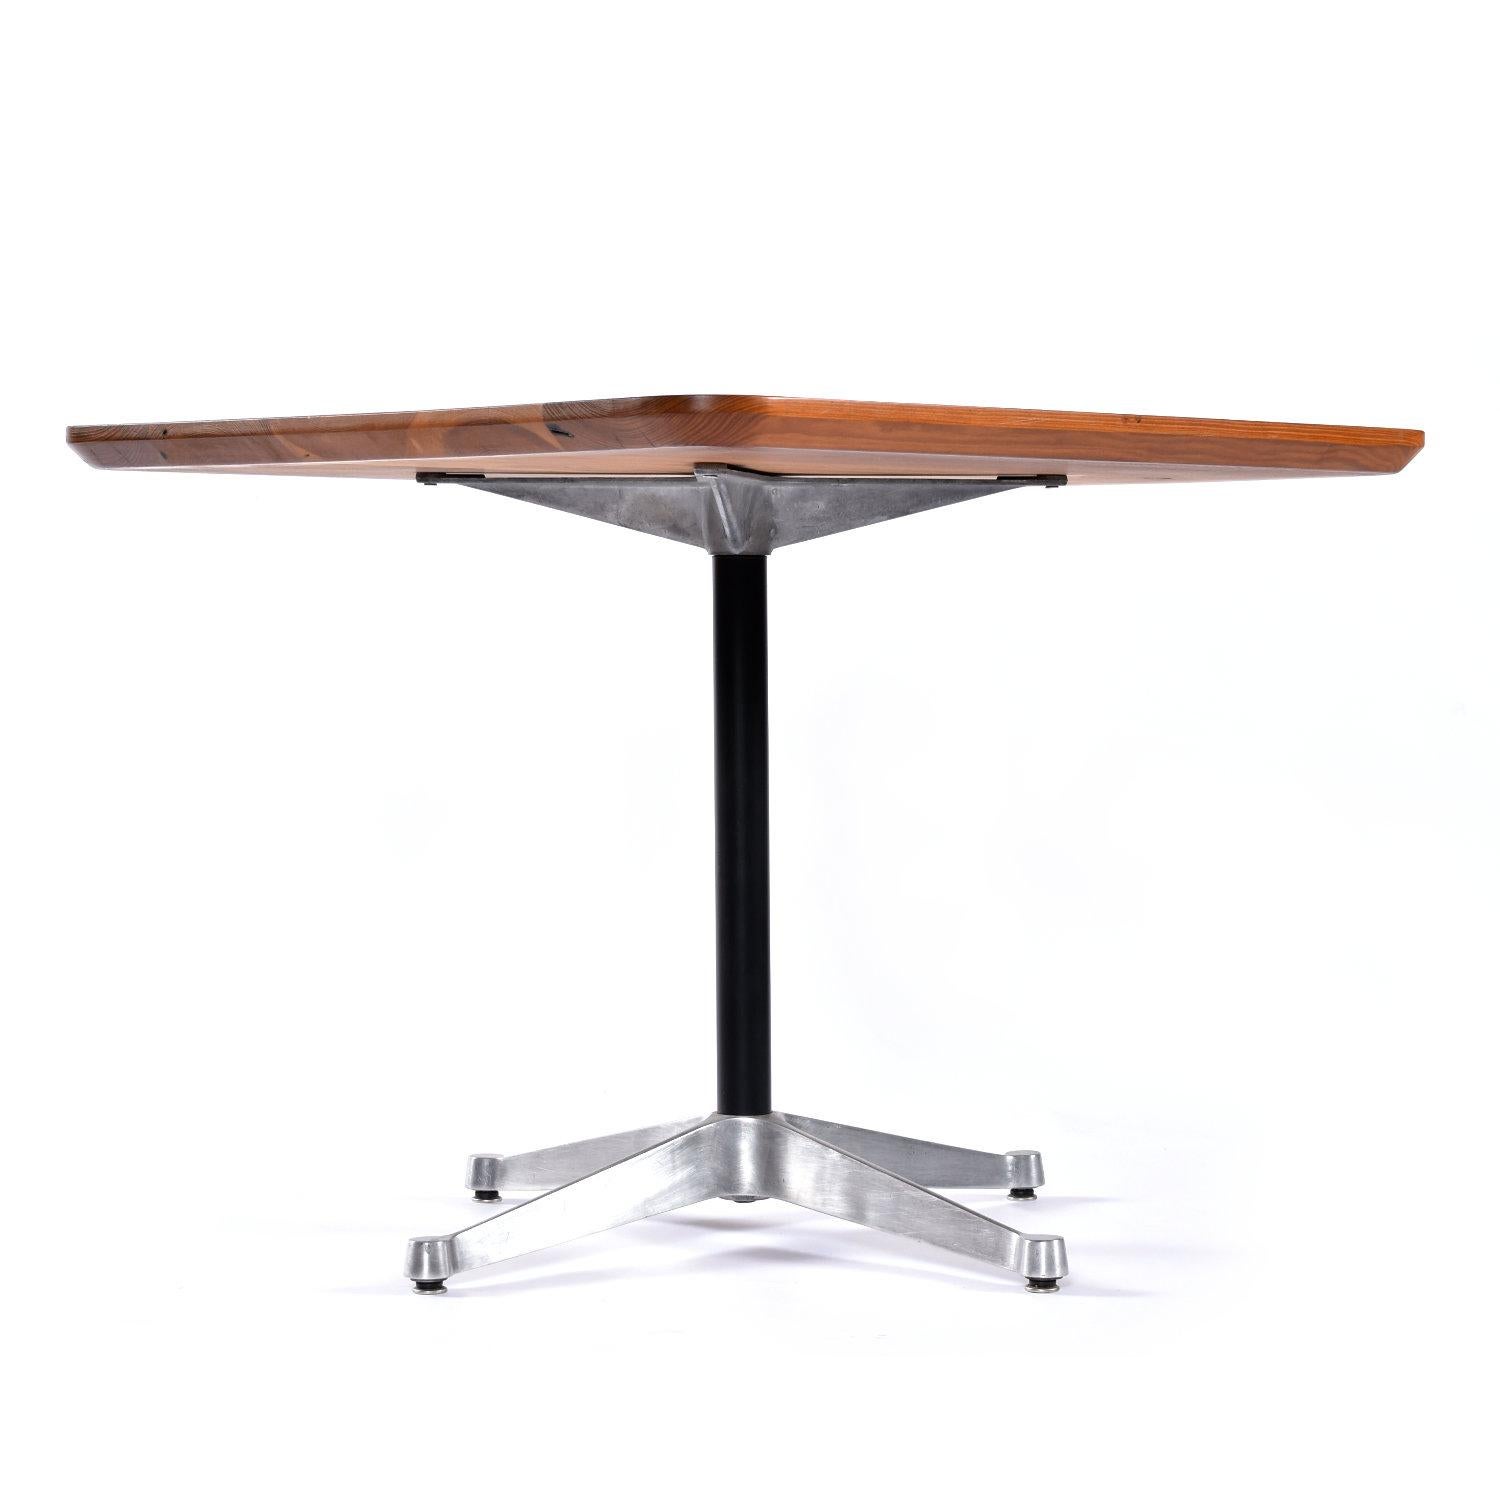 Vintage Eames table by Herman Miller with angular aluminum base. The 32″ square table is compact and versatile. Use this table in the dining room, kitchen, or office. The table was first designed by Charles and Ray Eames in 1964. The elegant yet